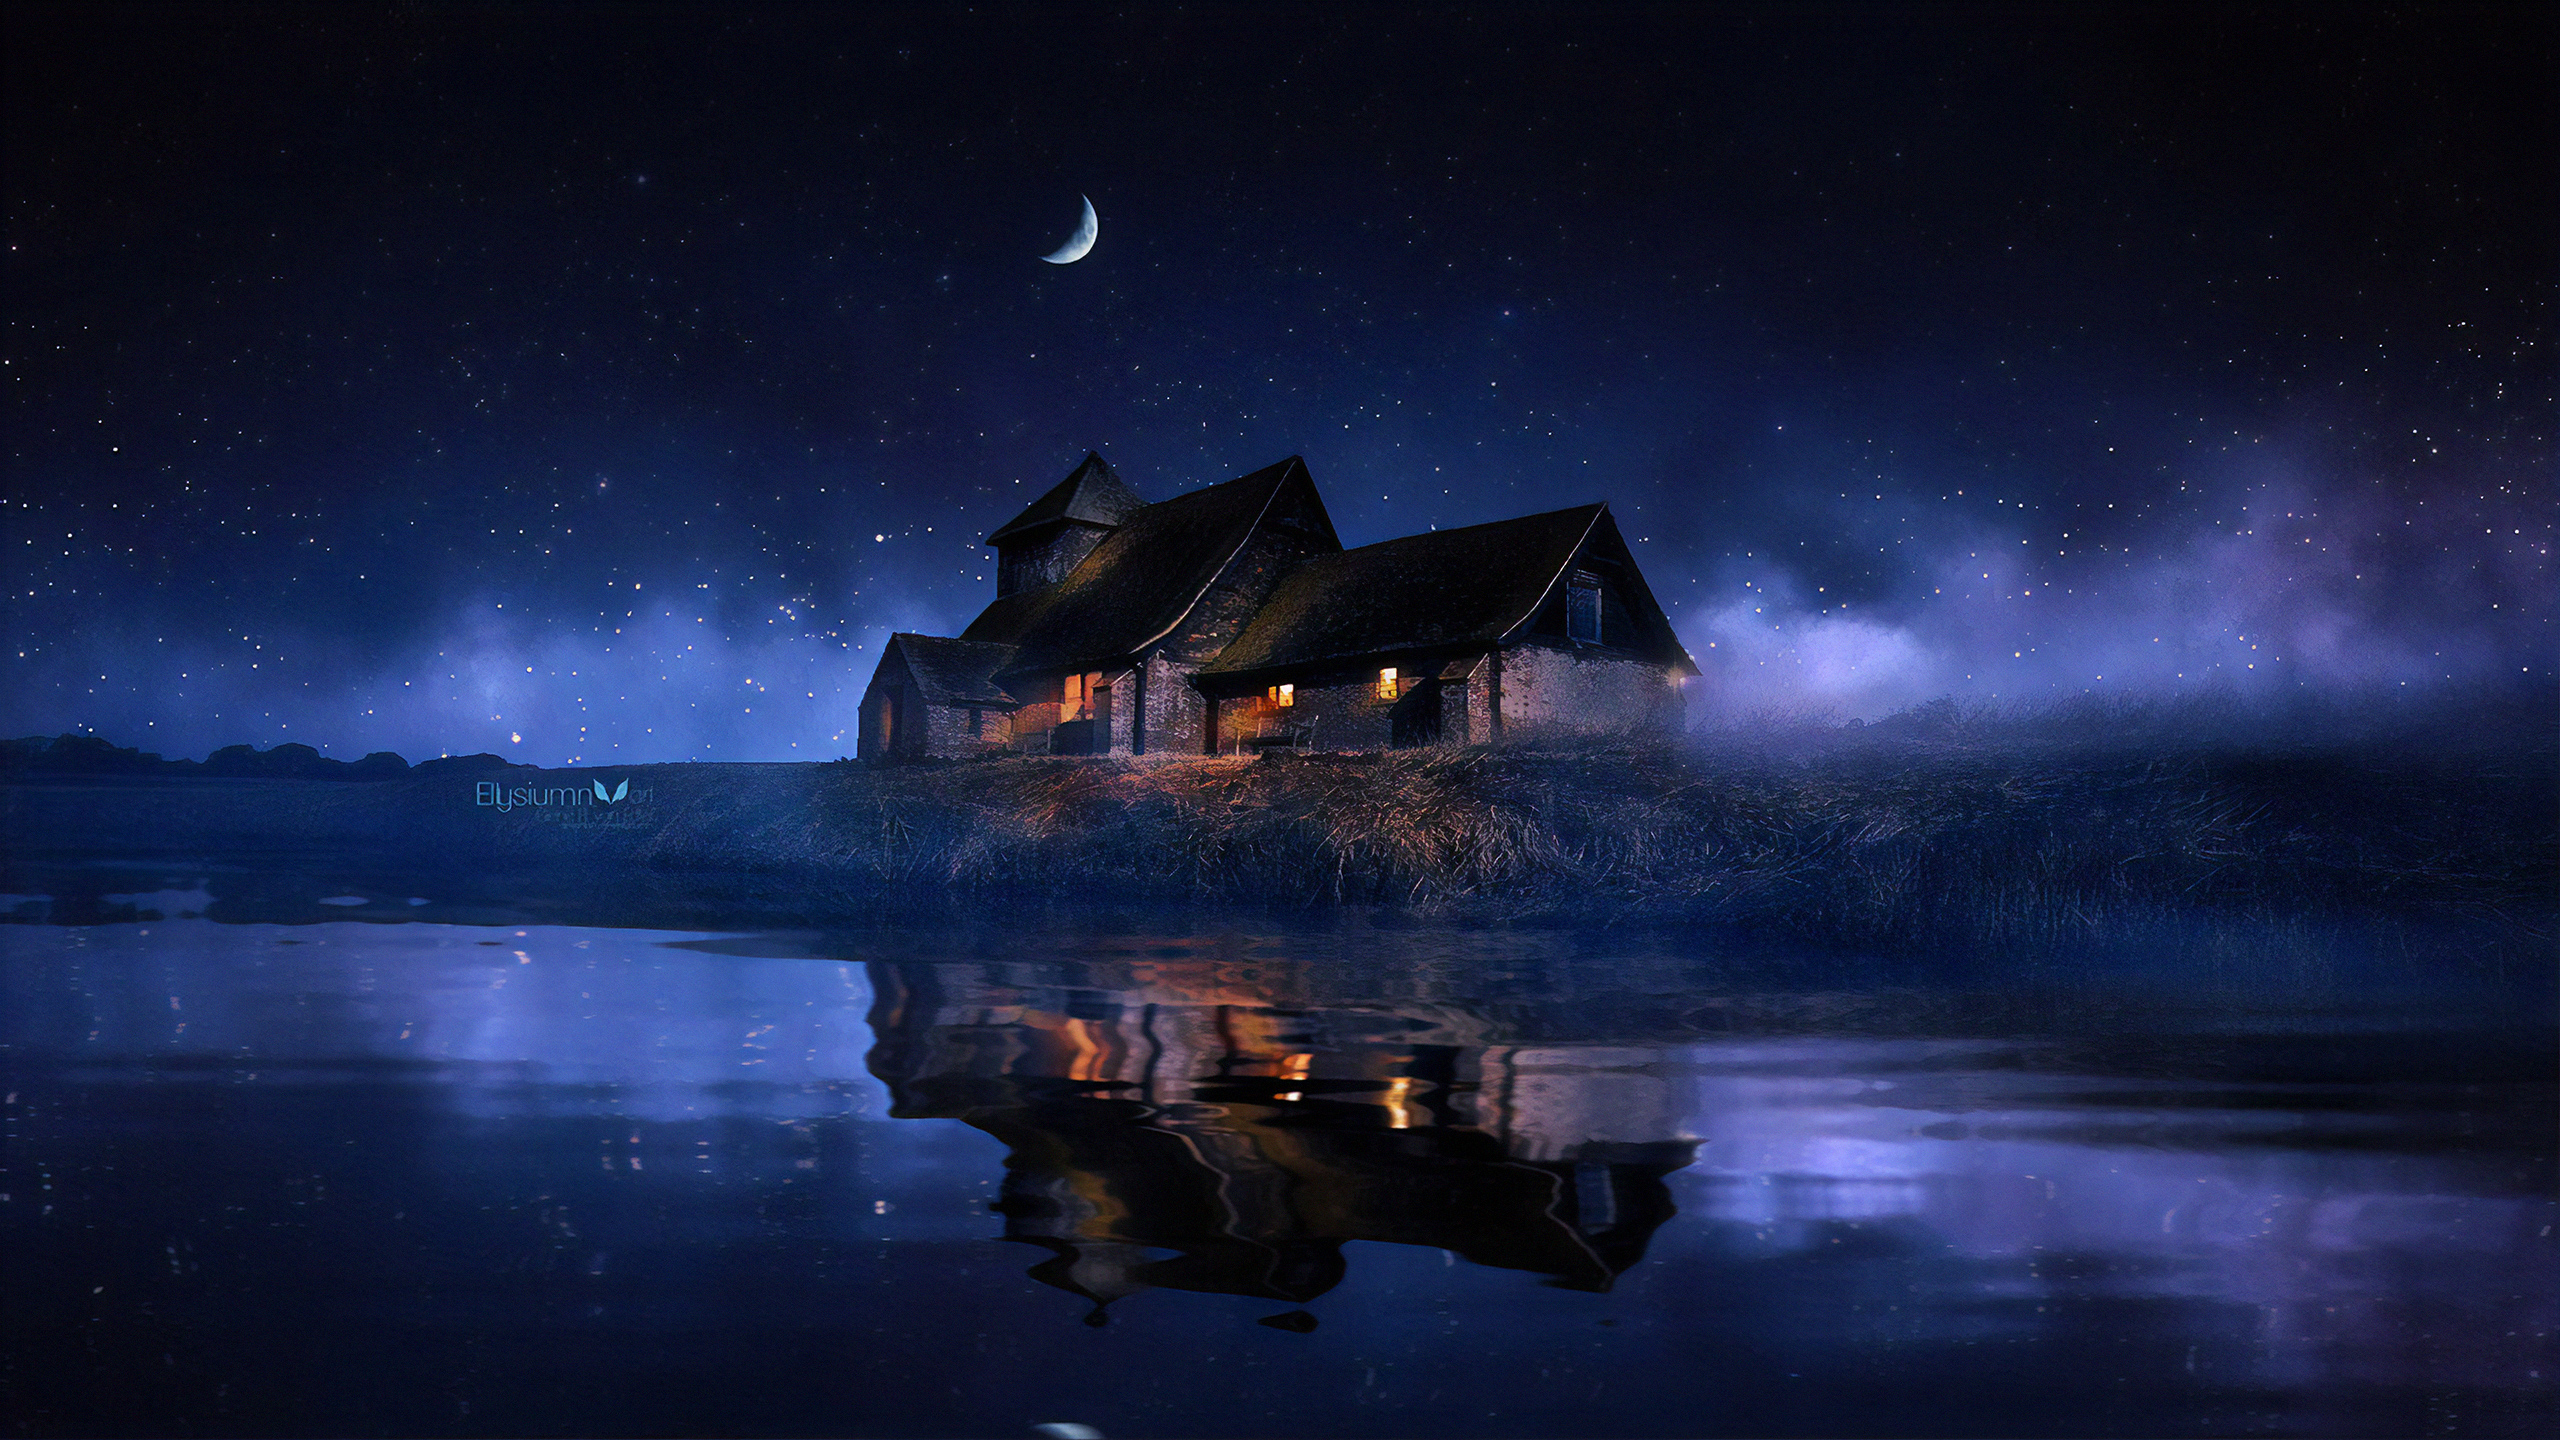 House Reflected In The Lake Hd Wallpaper Background Image 2560x1440